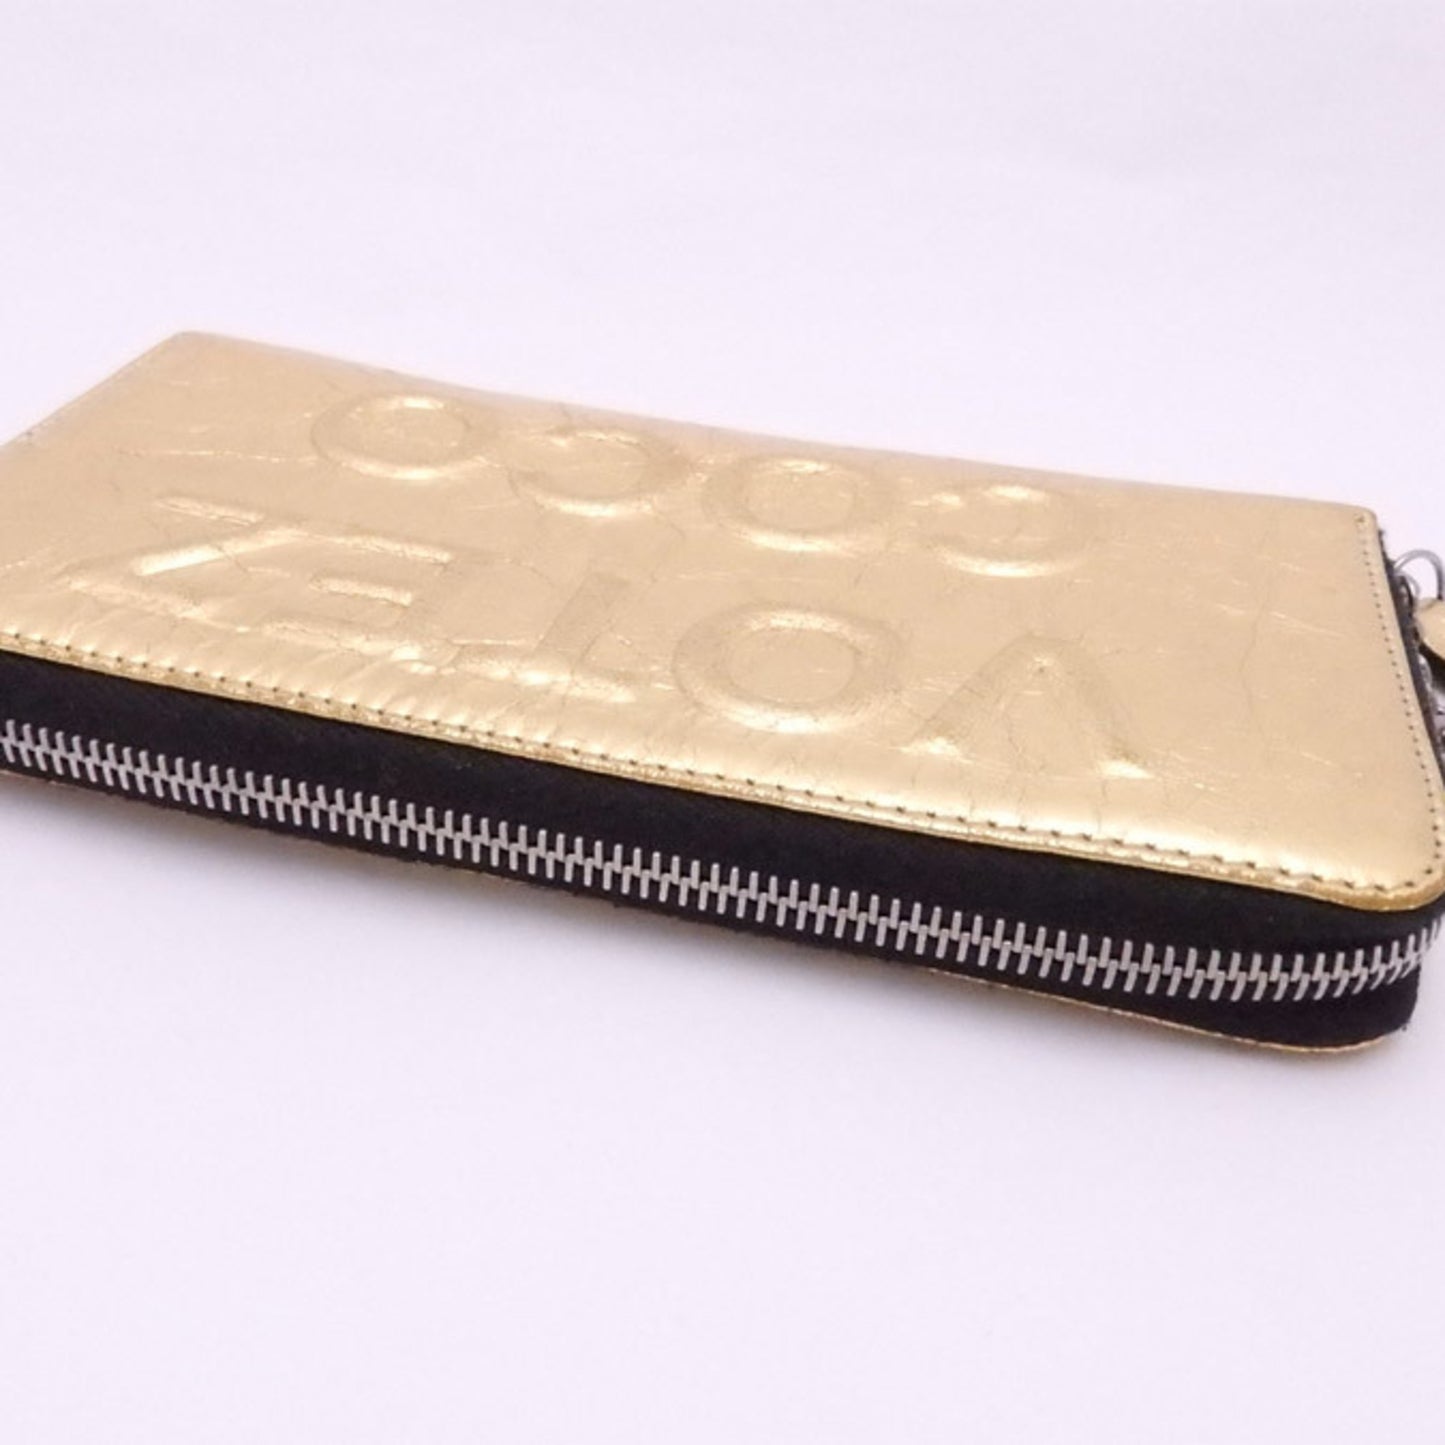 Chanel Women's Coco Mark Leather Wallet in Gold